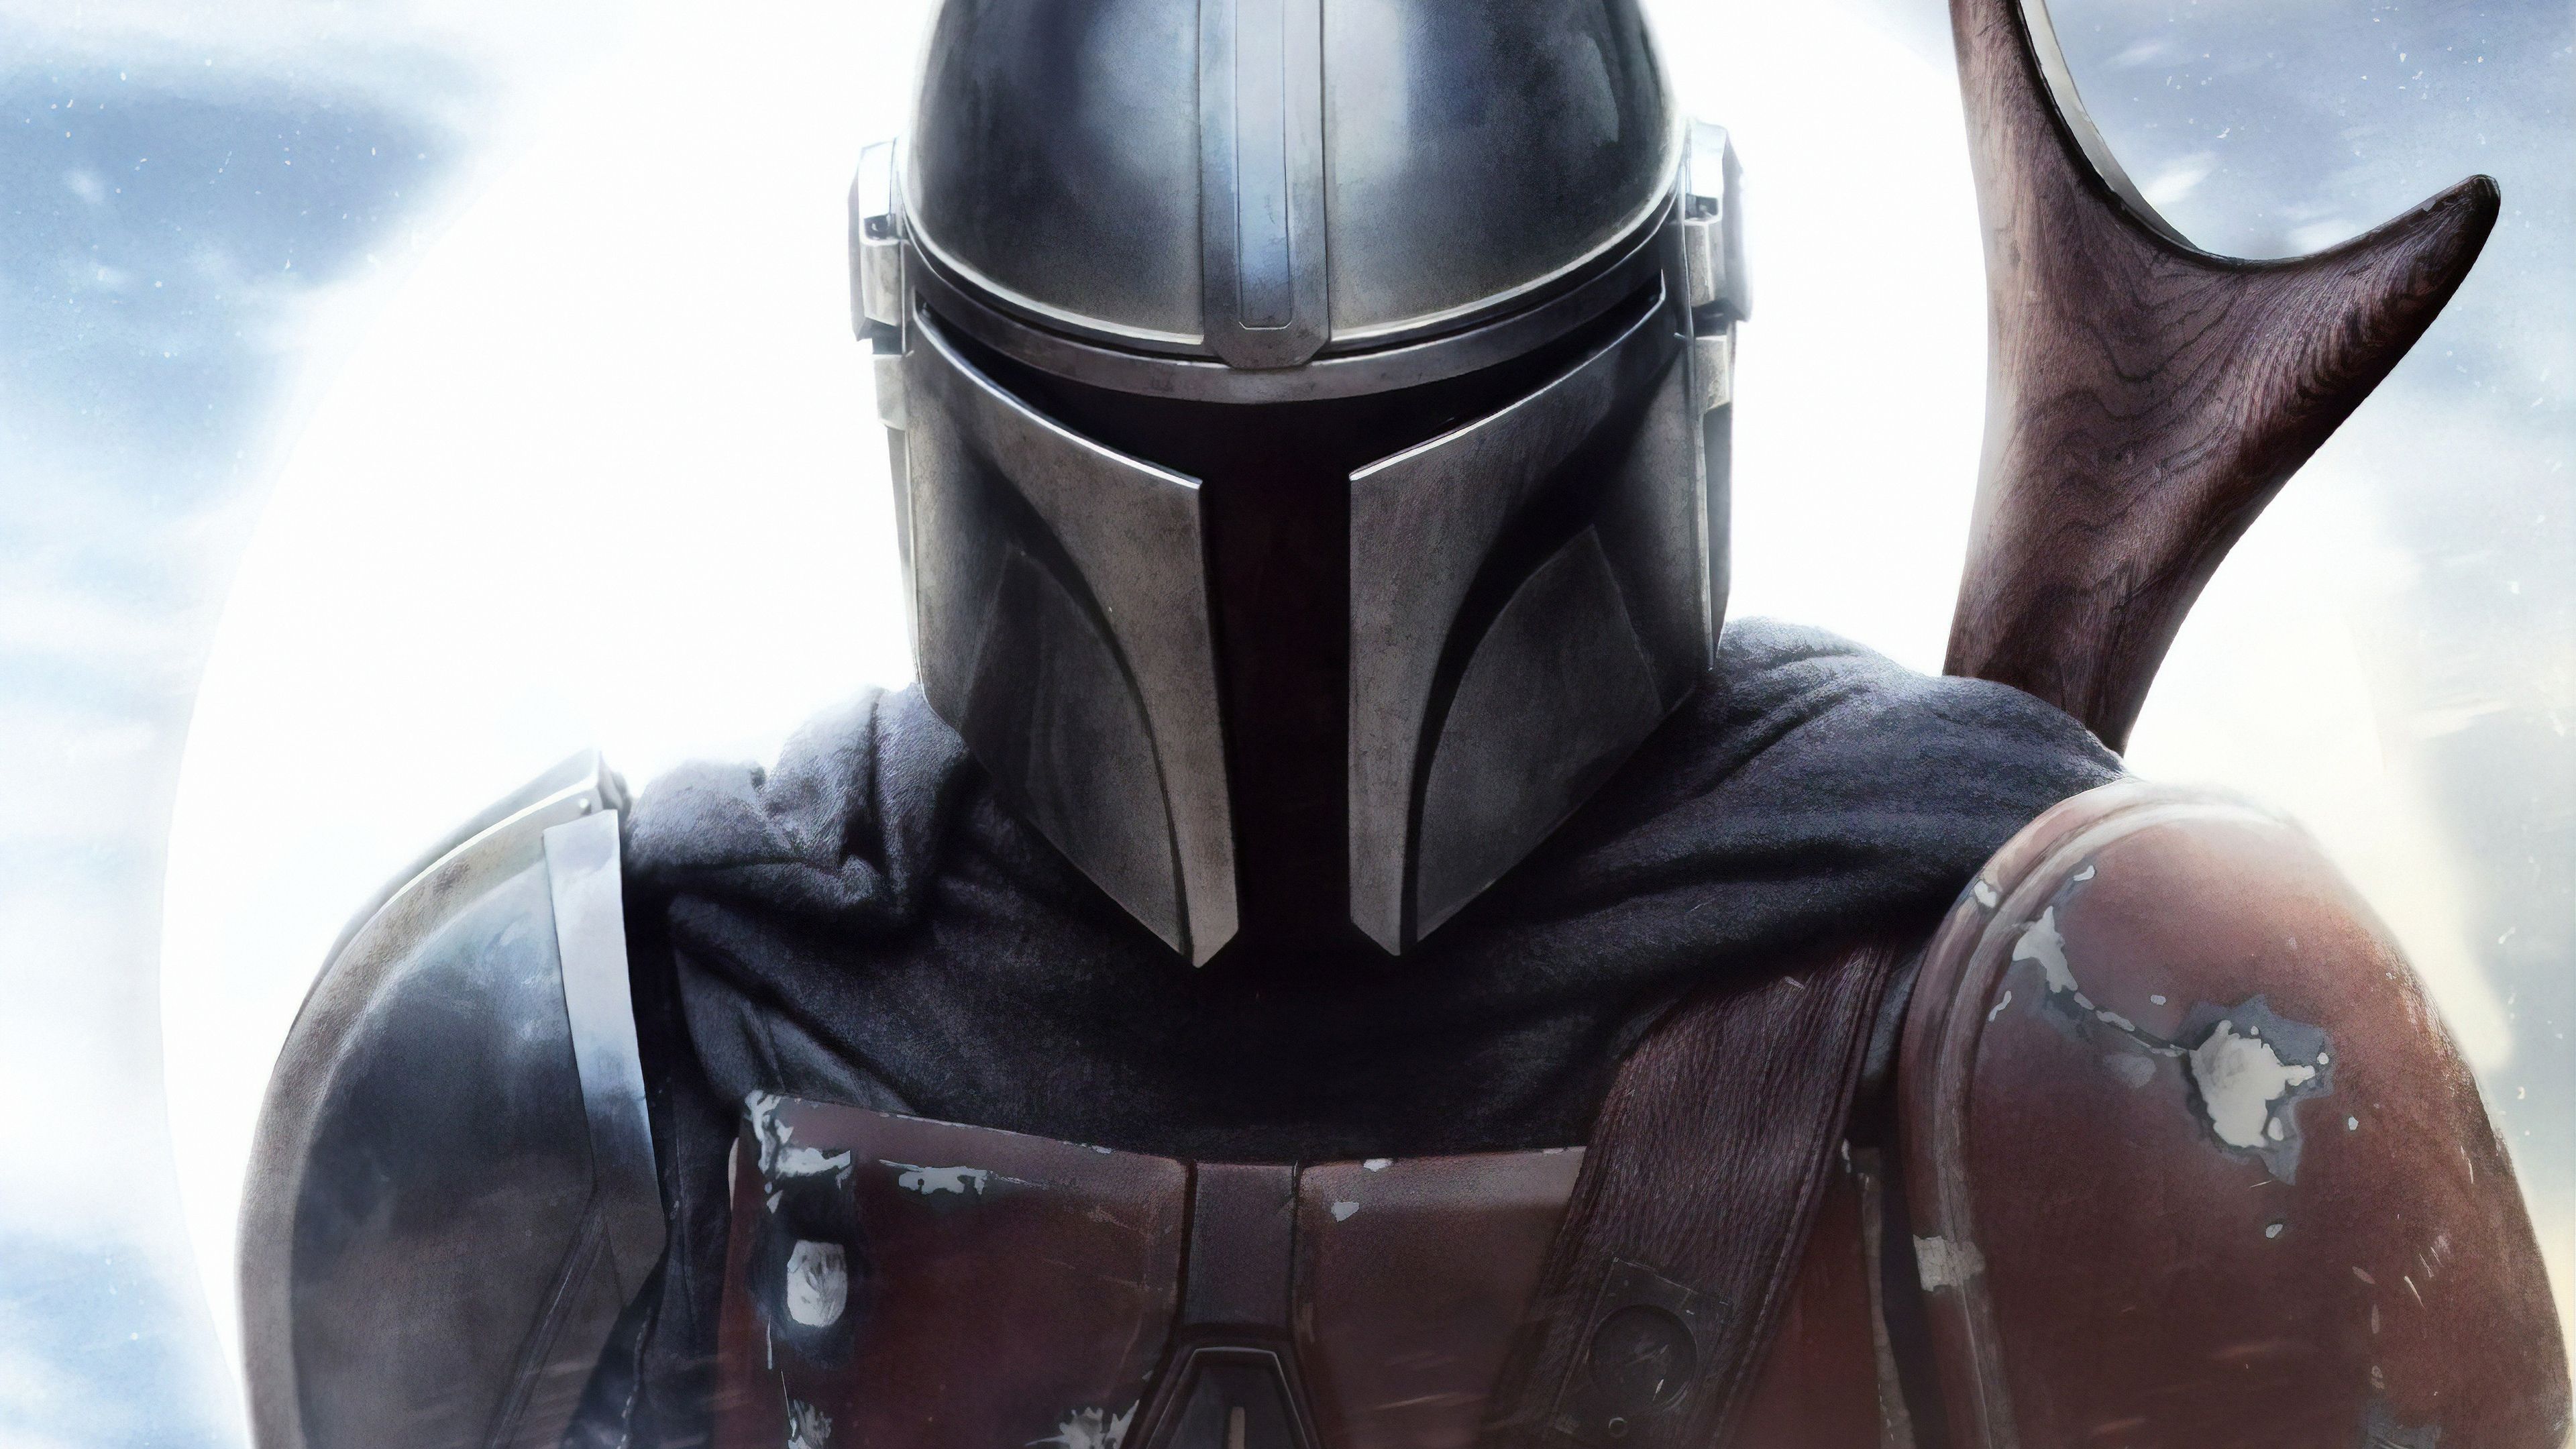 Mandalorian 4K wallpaper for your desktop or mobile screen free and easy to download